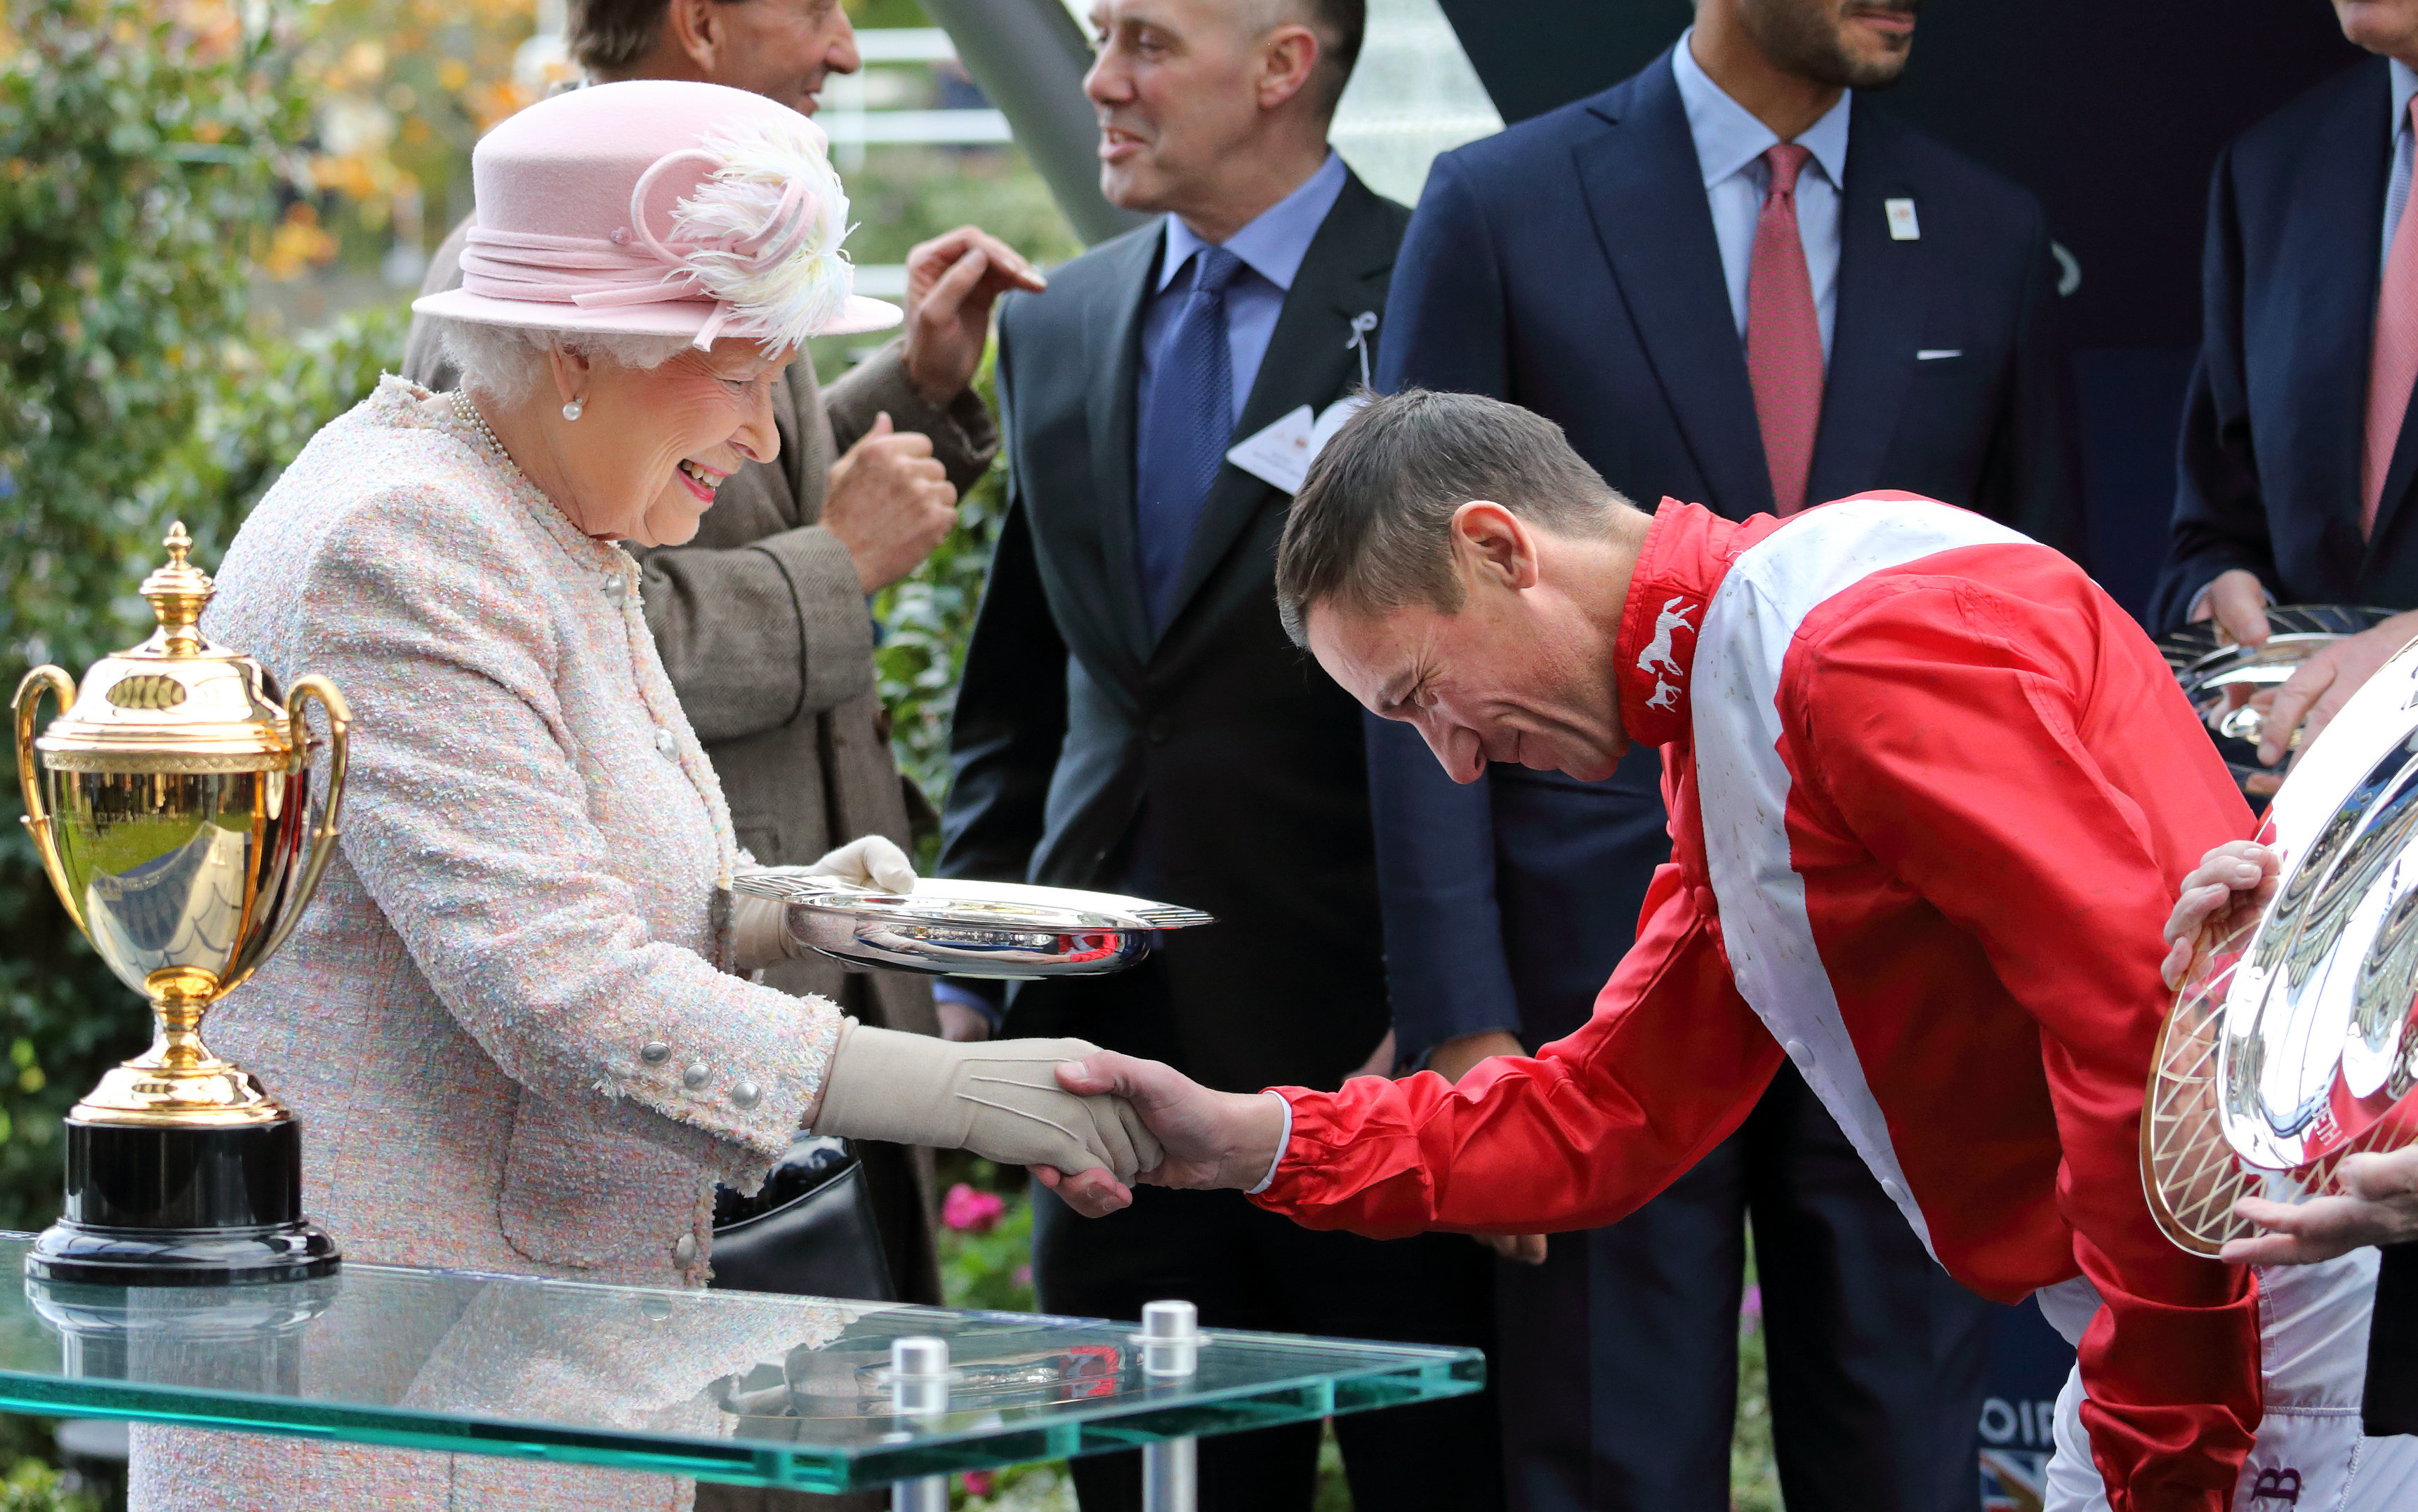 <strong>Jockey Frankie Dettori&nbsp;gives a formal handshake to the Queen&nbsp;</strong>